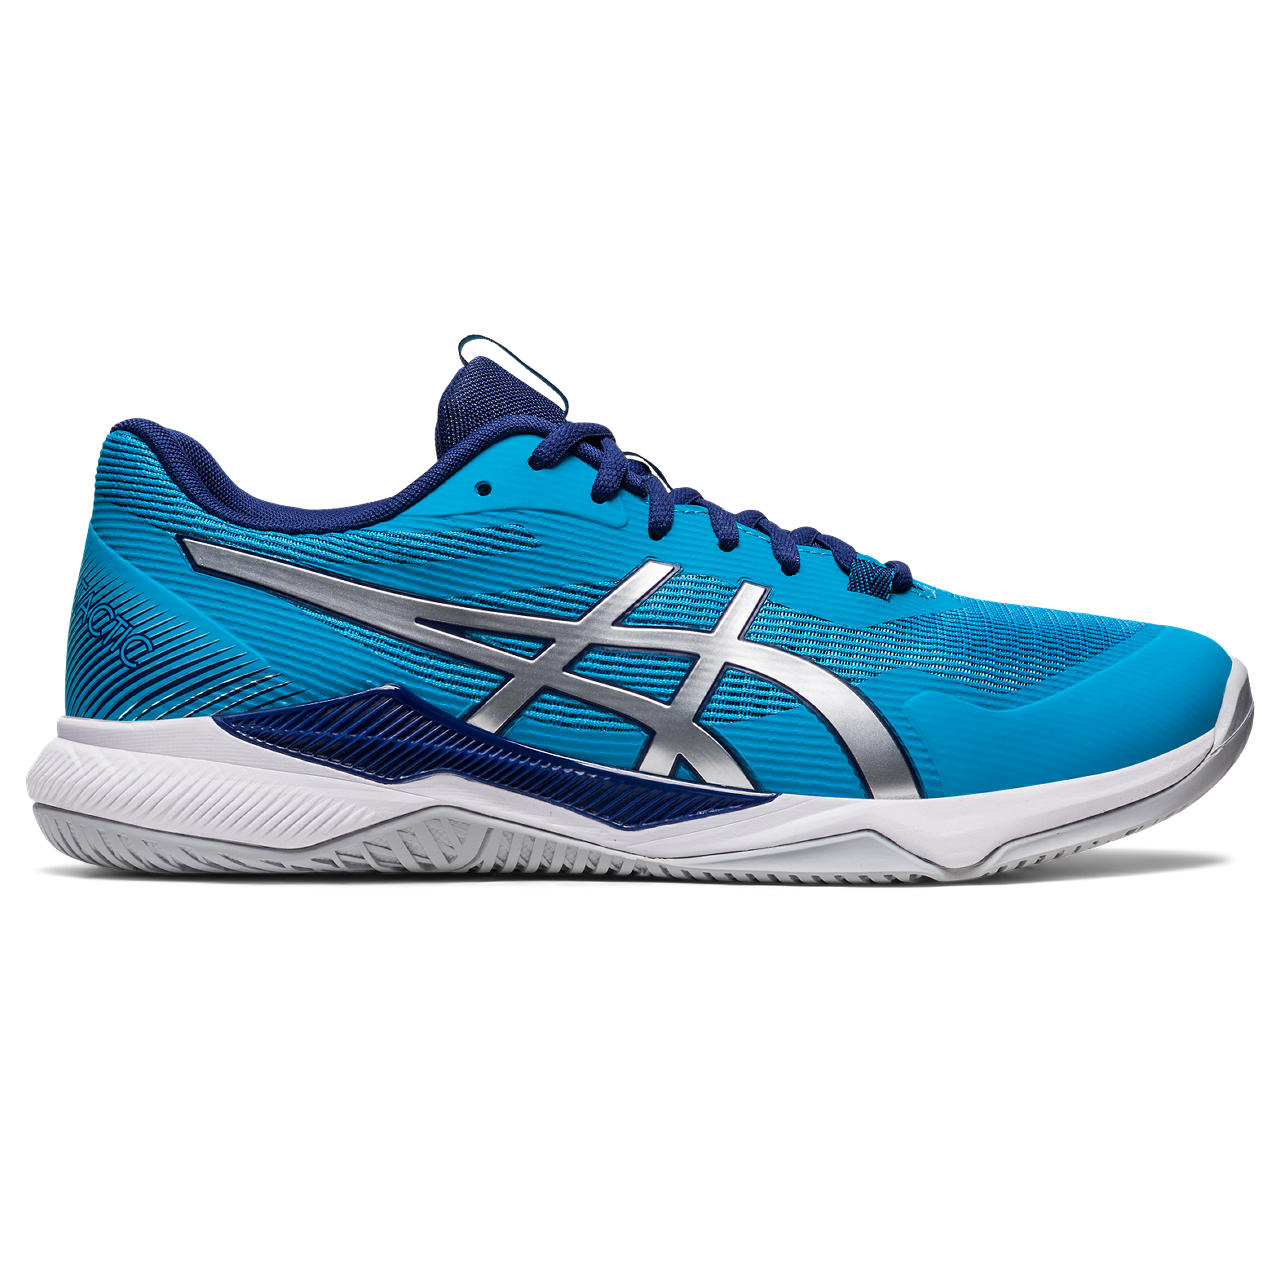 ASICS GEL-TACTIC, ISLAND BLUE/PURE SILVER, swatch